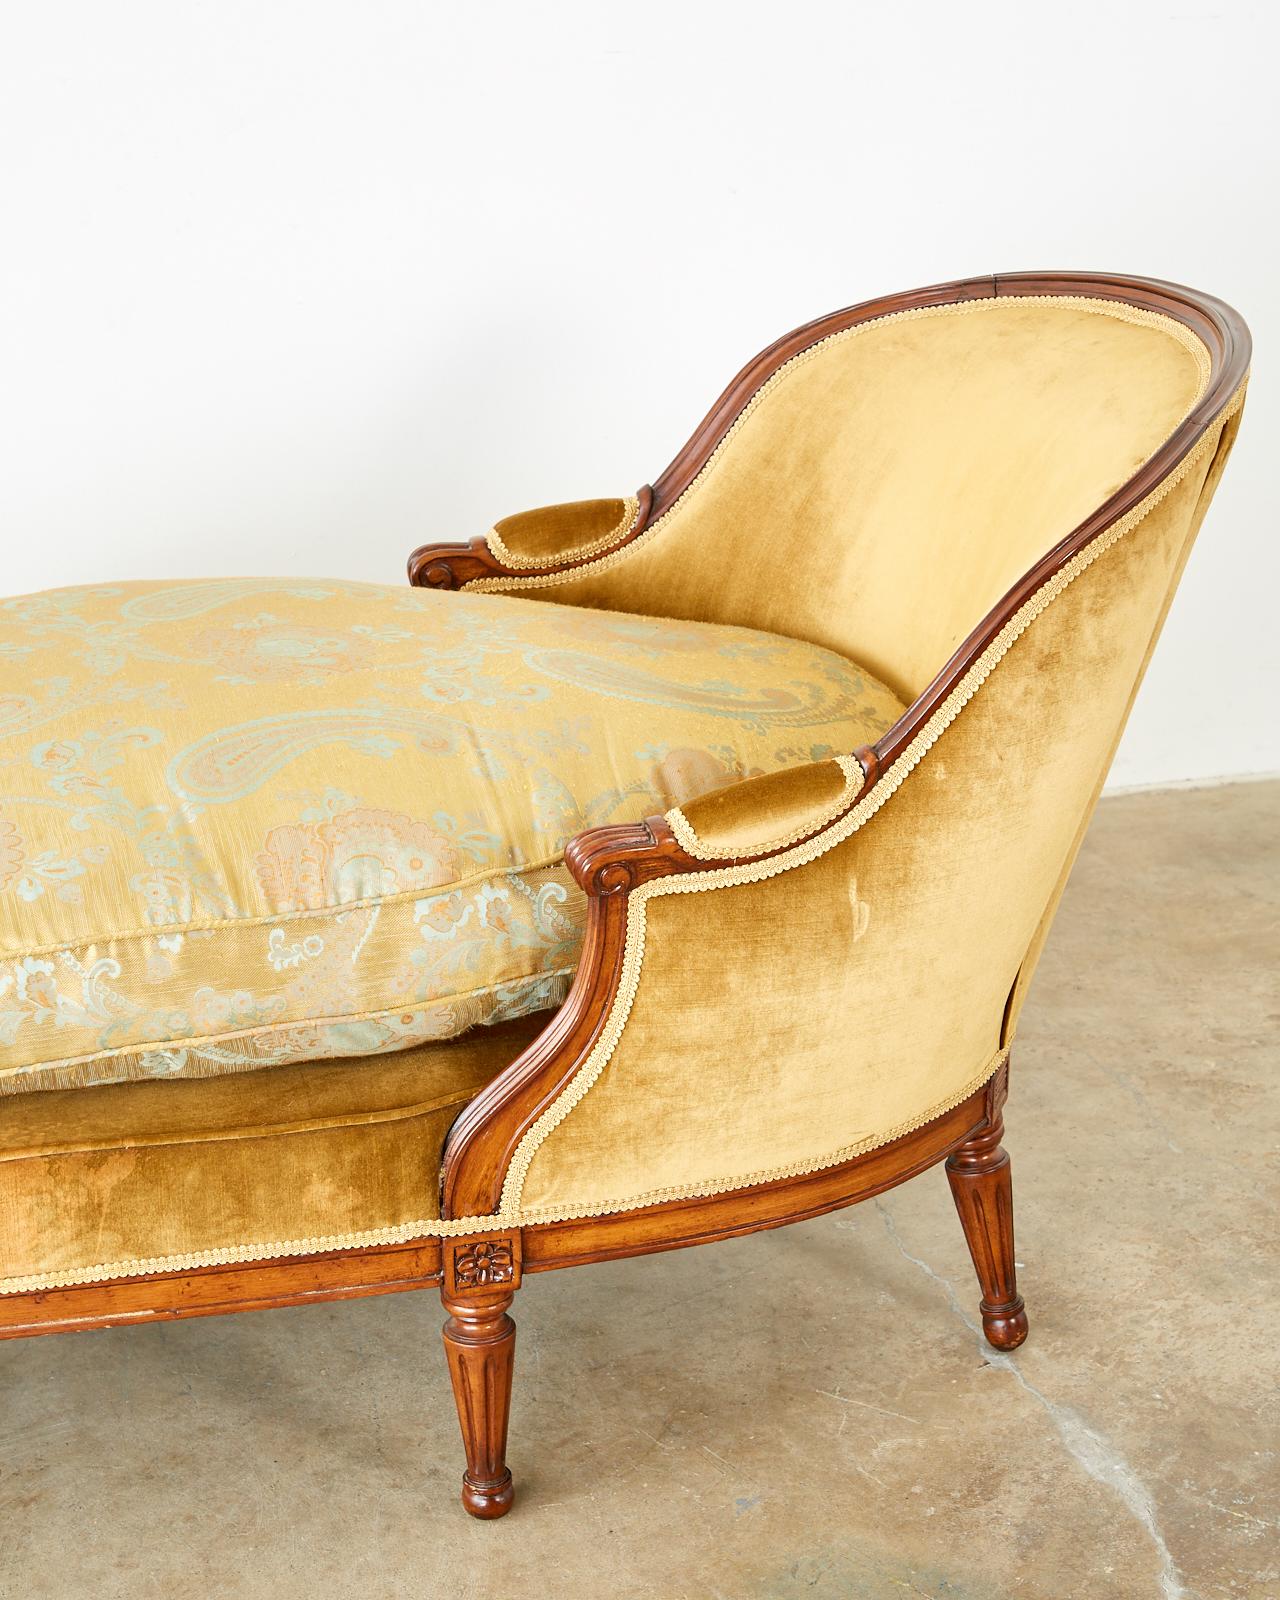 Hand-Crafted French Louis XVI Style Chaise Longue Daybed